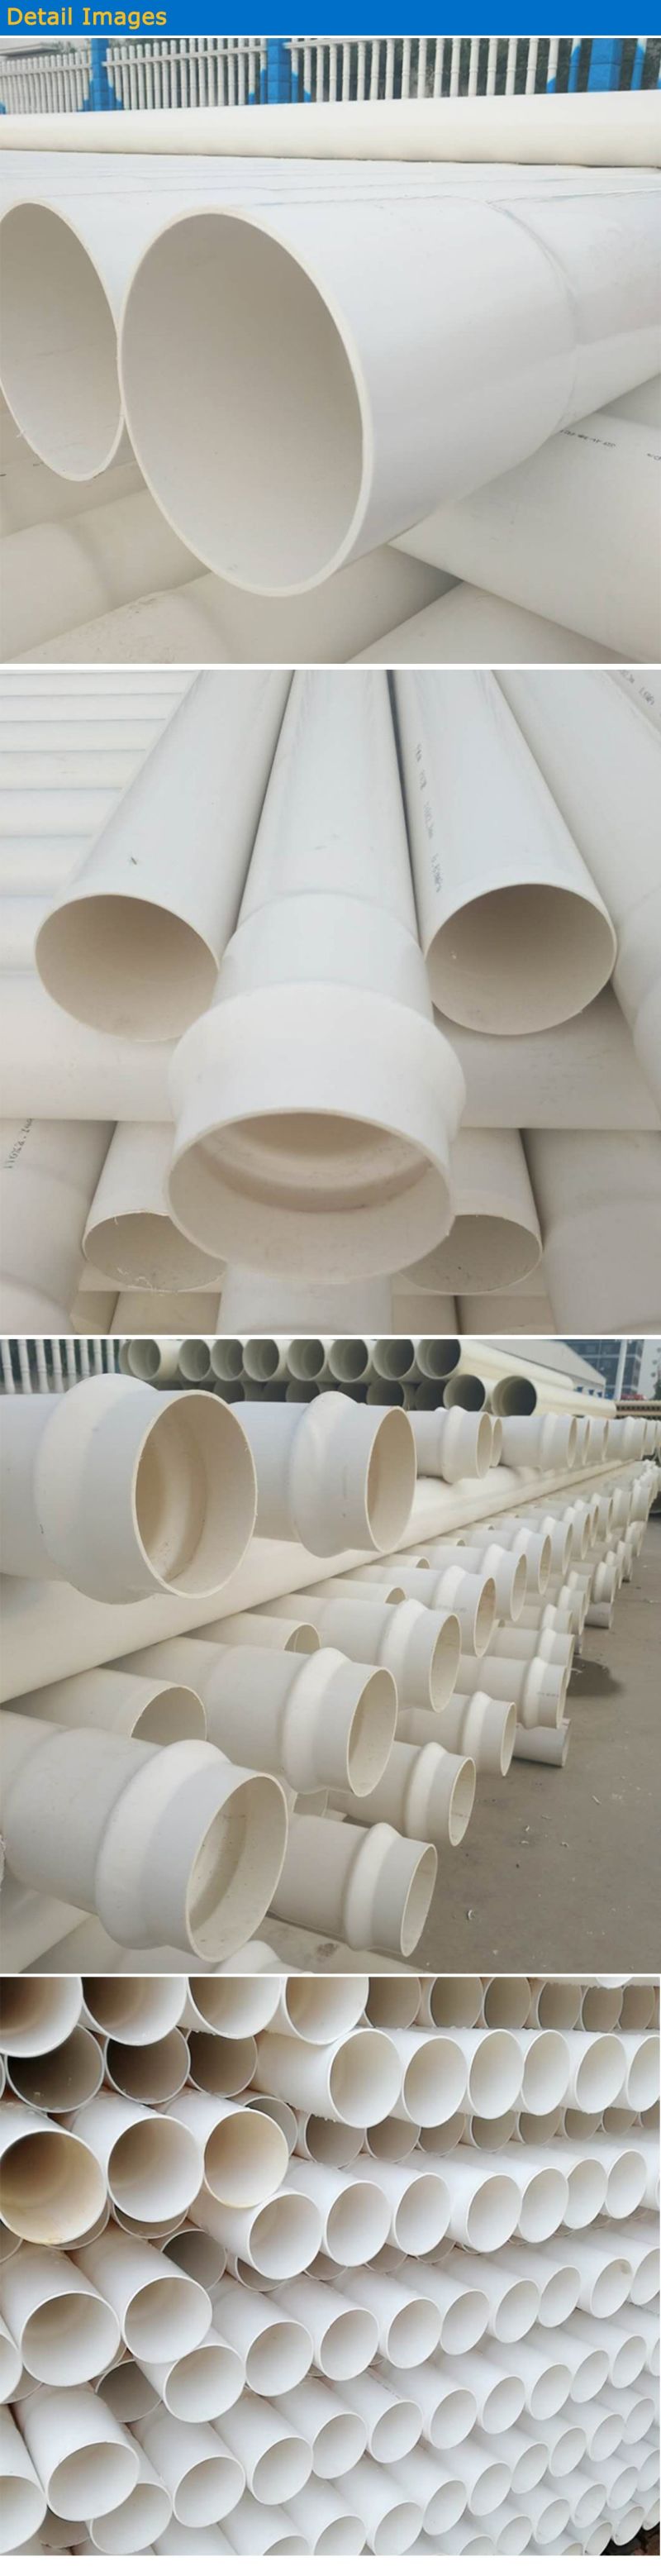 30 Inch Diameter Food Grade 9 Inch PVC Pipe 200 mm for Hydroponic